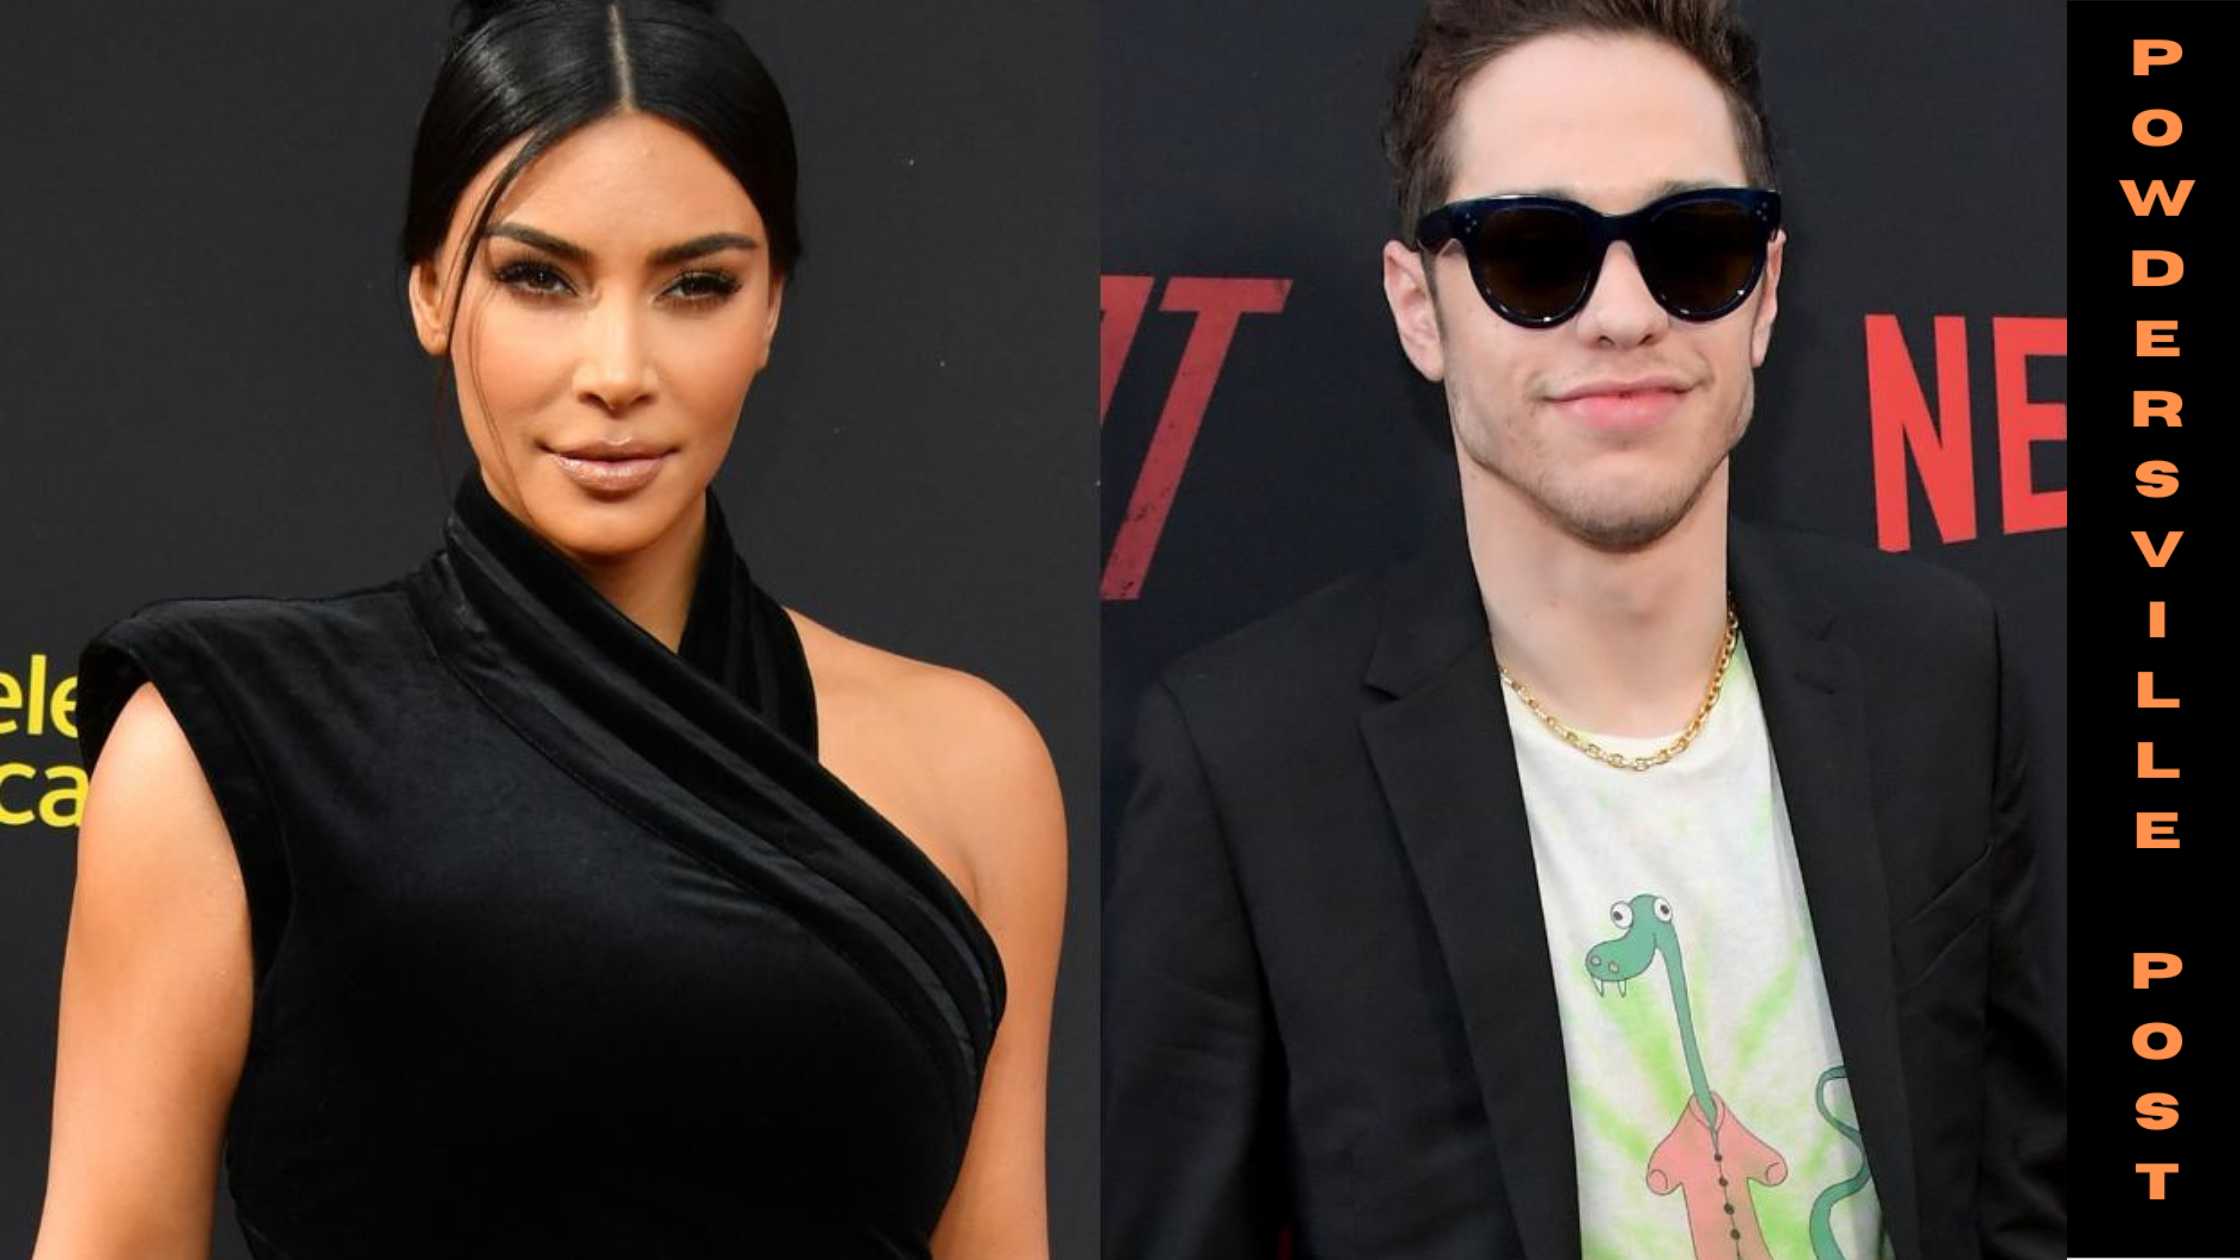 American Comedian Pete Davidson Decided To Have A Tribute Tattoo For His Girlfriend Kim Kardashian